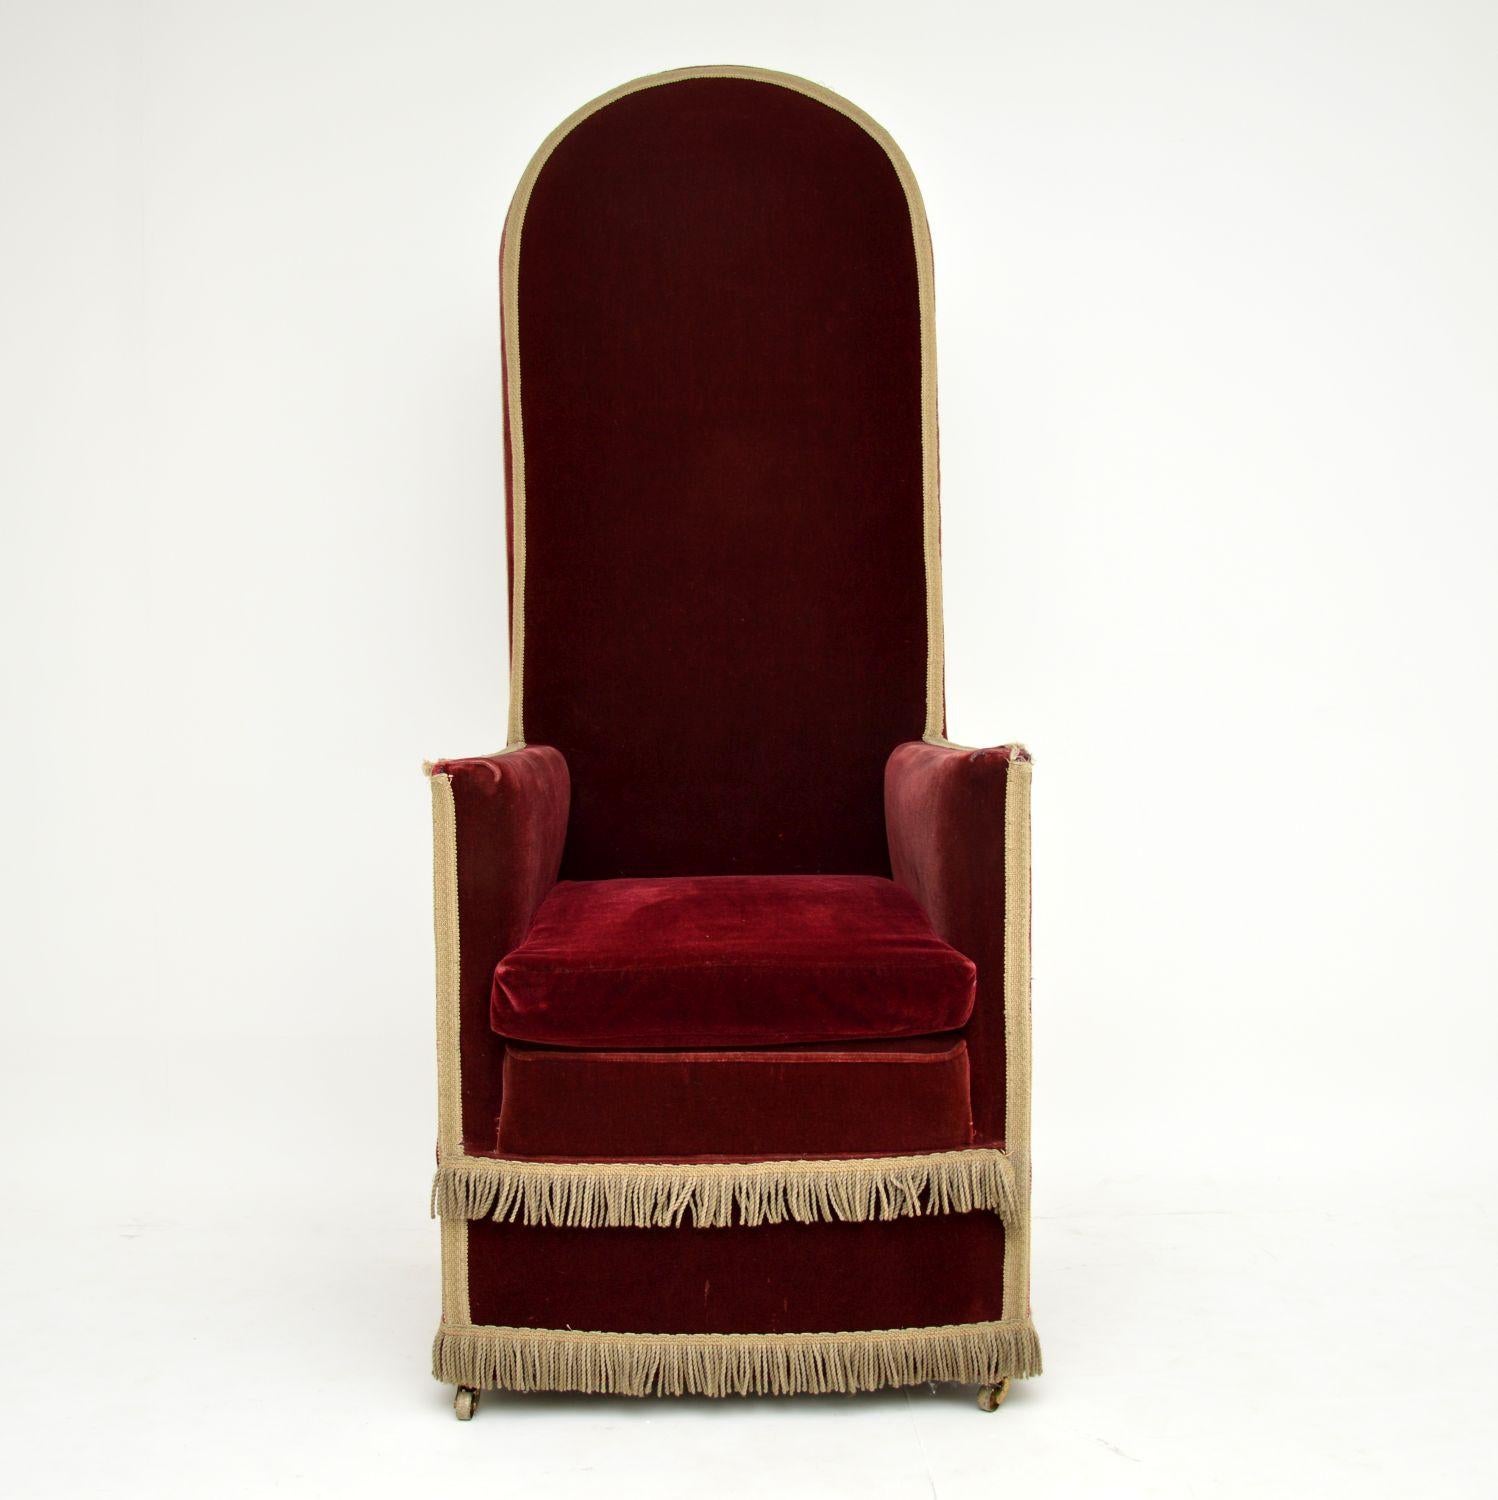 This antique Victorian high back armchair has a very high back, which is hard to visualize in the images, so double check the measurements. It has a very grand, almost throne like look & could have been used for something ceremonial.

This chair